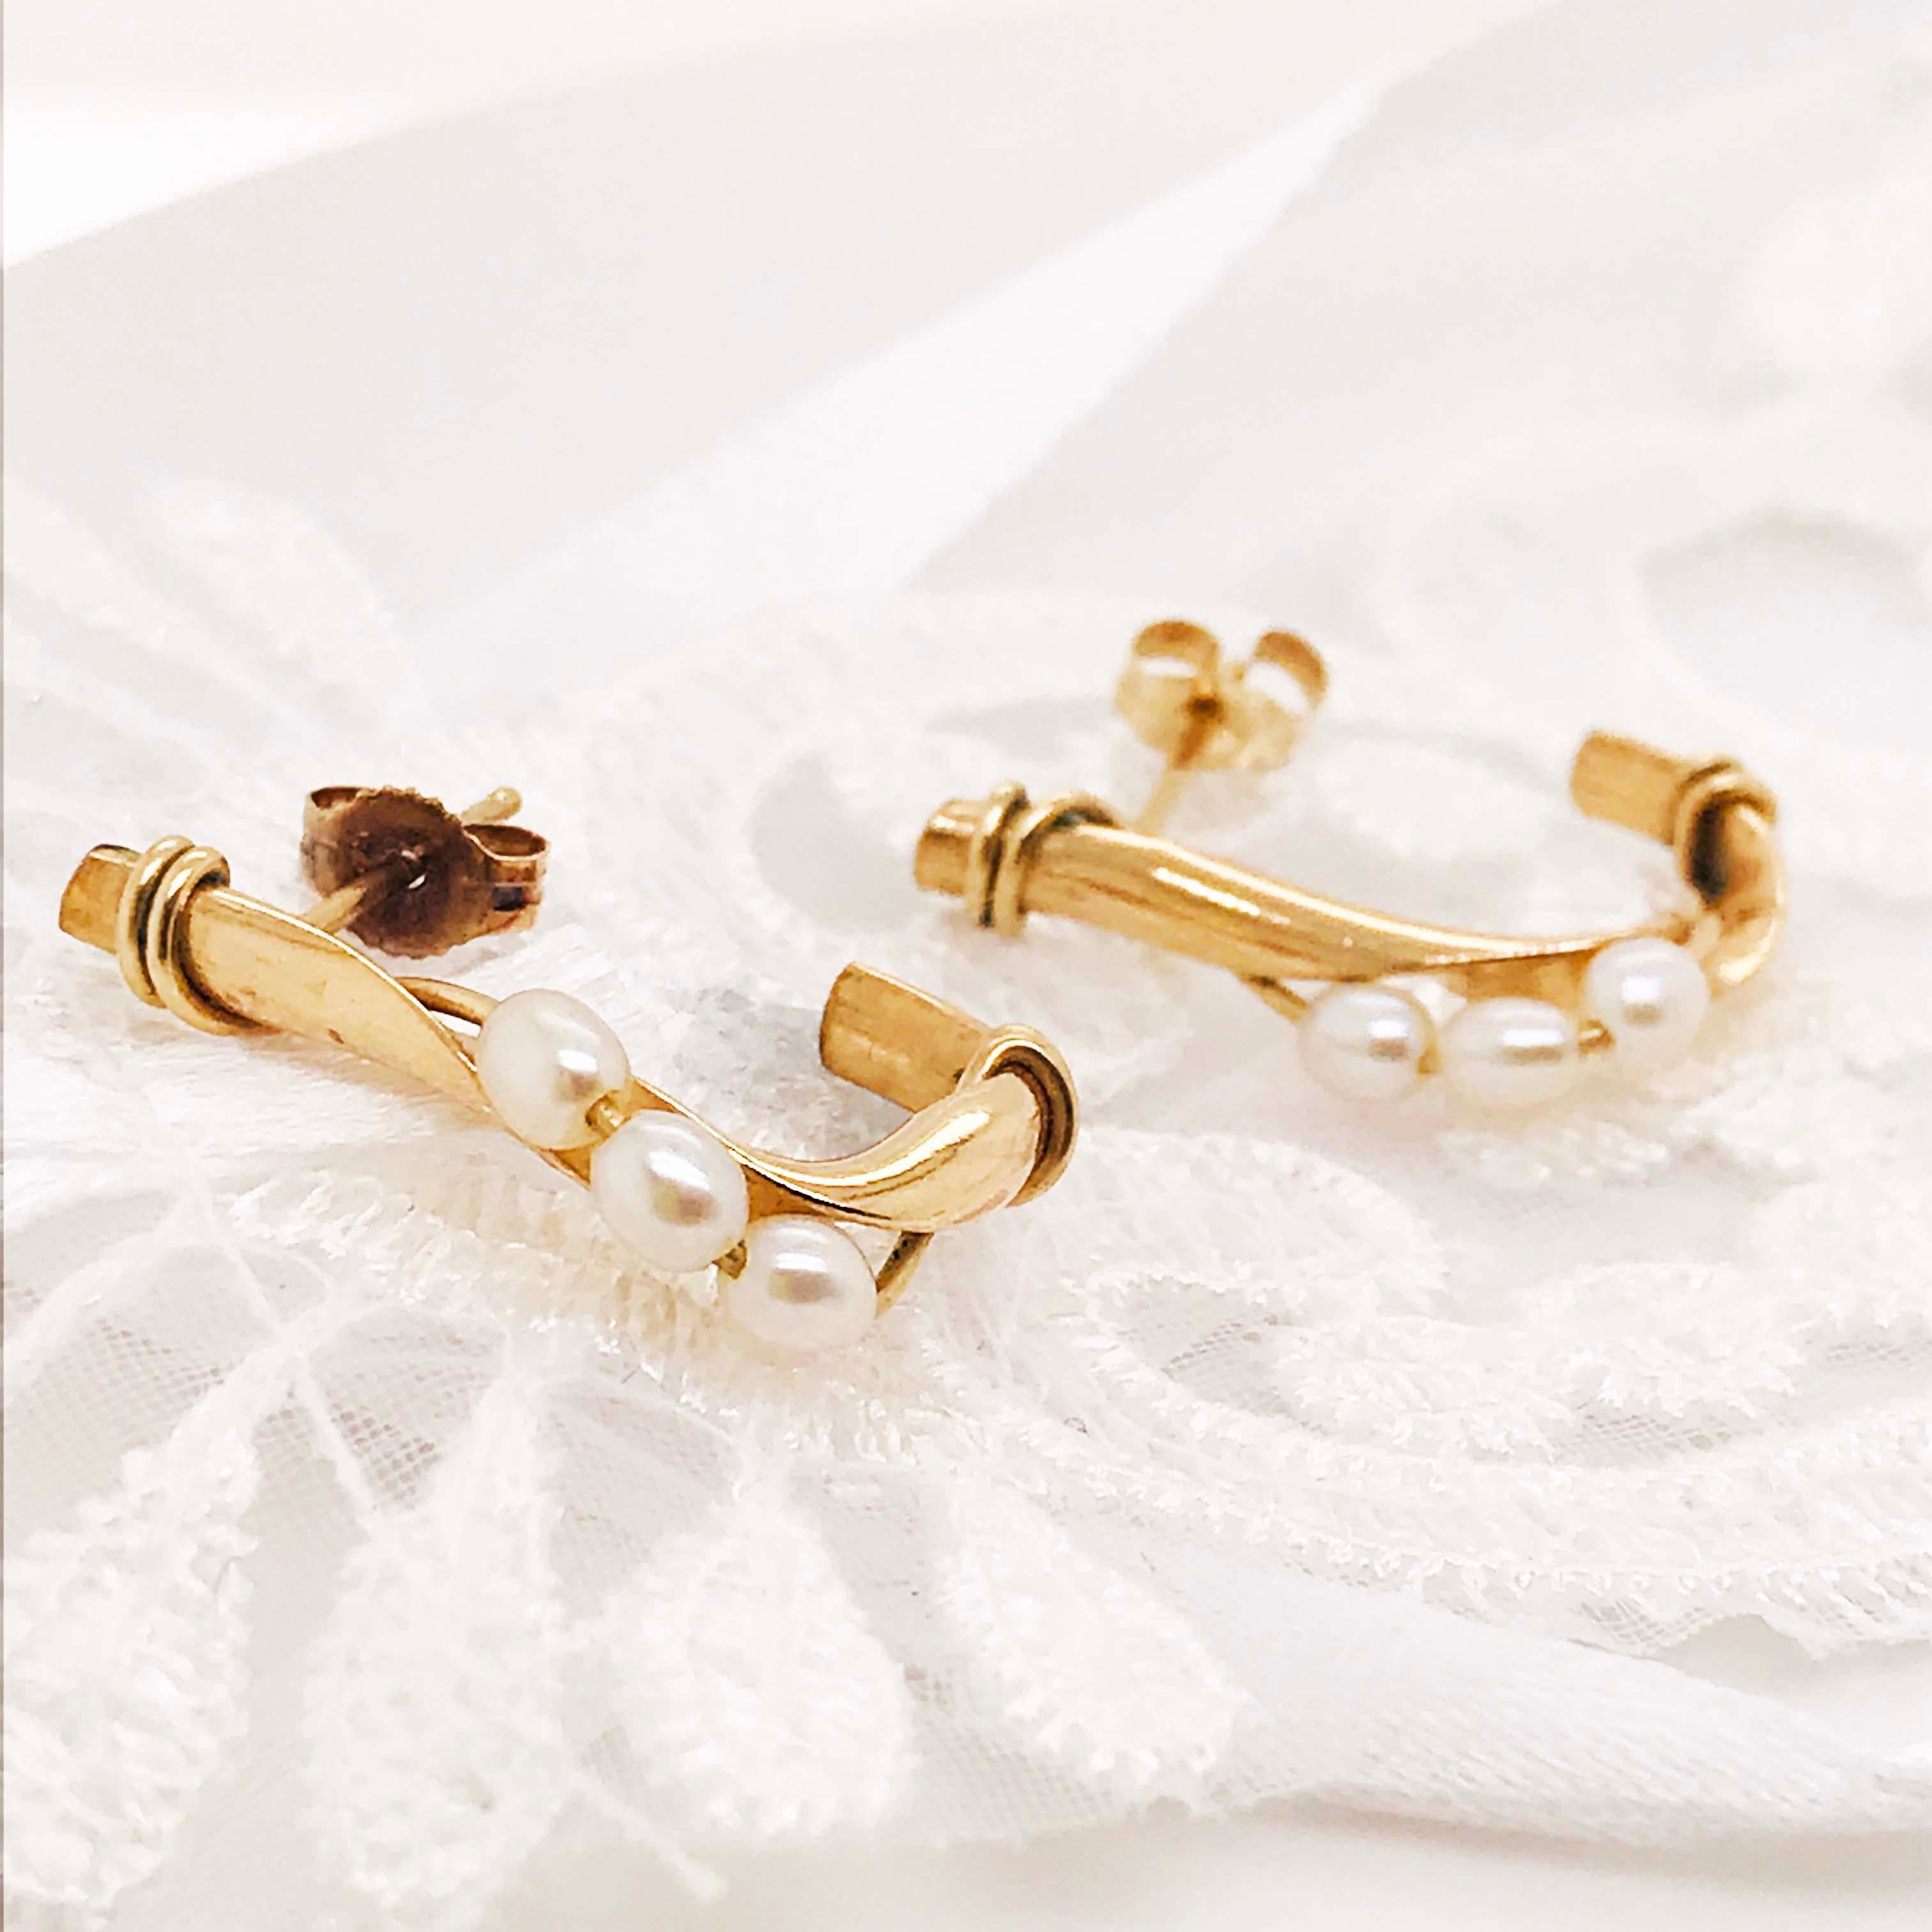 The sweet, traditional pearl earrings have a unique J form and design. With three genuine pearls strung on a gold wire and set on a custom J shaped earring. The pearl earrings have a 14k yellow gold twisted, bark-like design that looks like natural